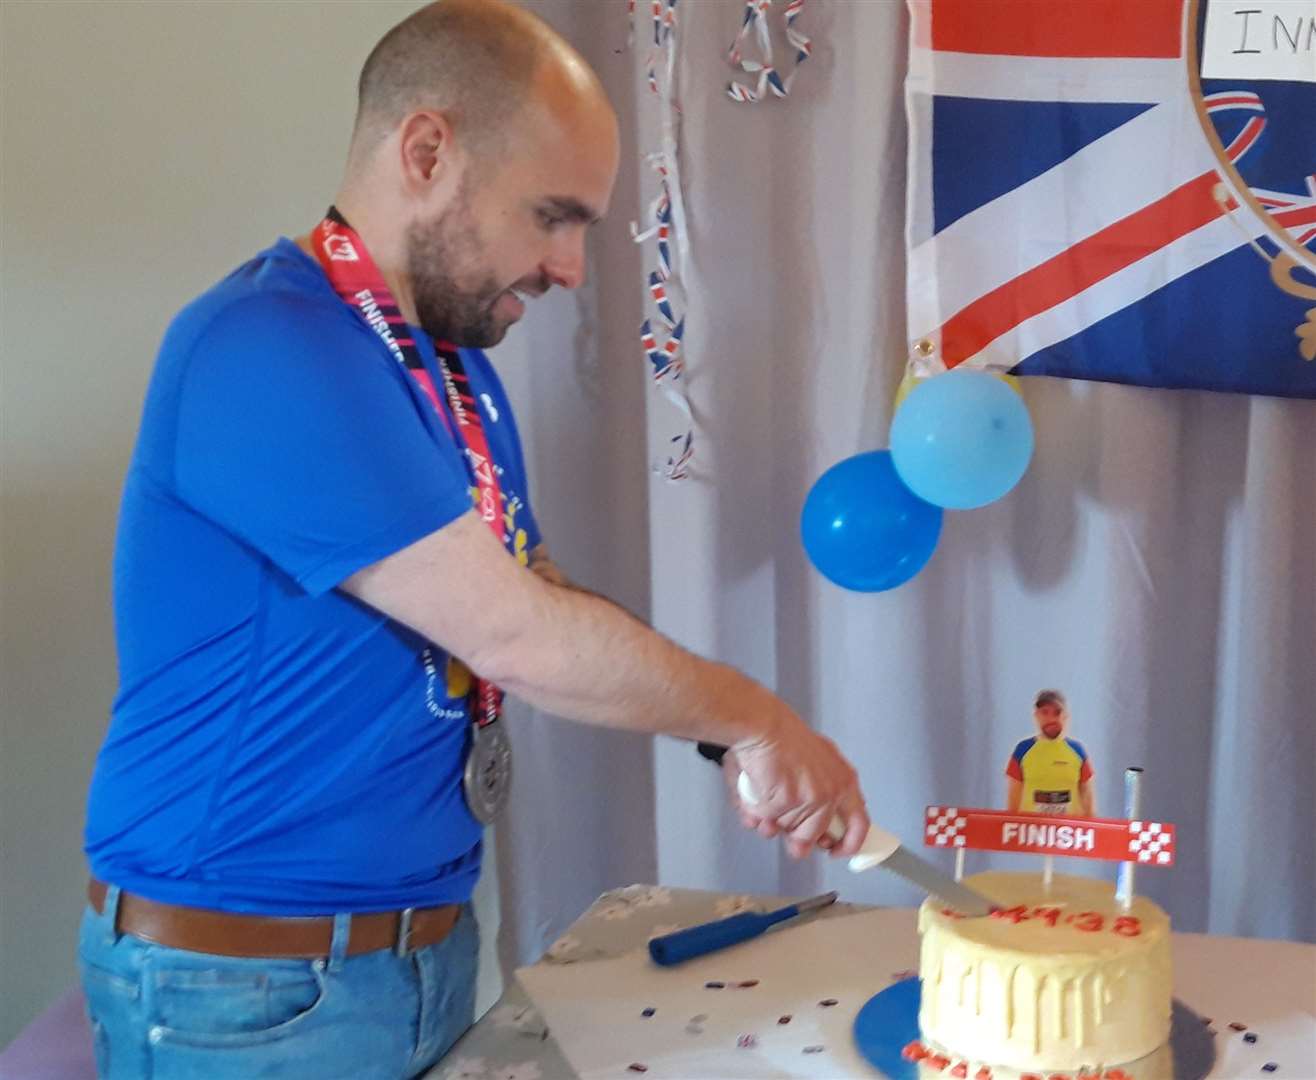 Mr Mackay cuts the cake which was made by Lyla Murray of Single Malt Baking and had a finish line on top of it.